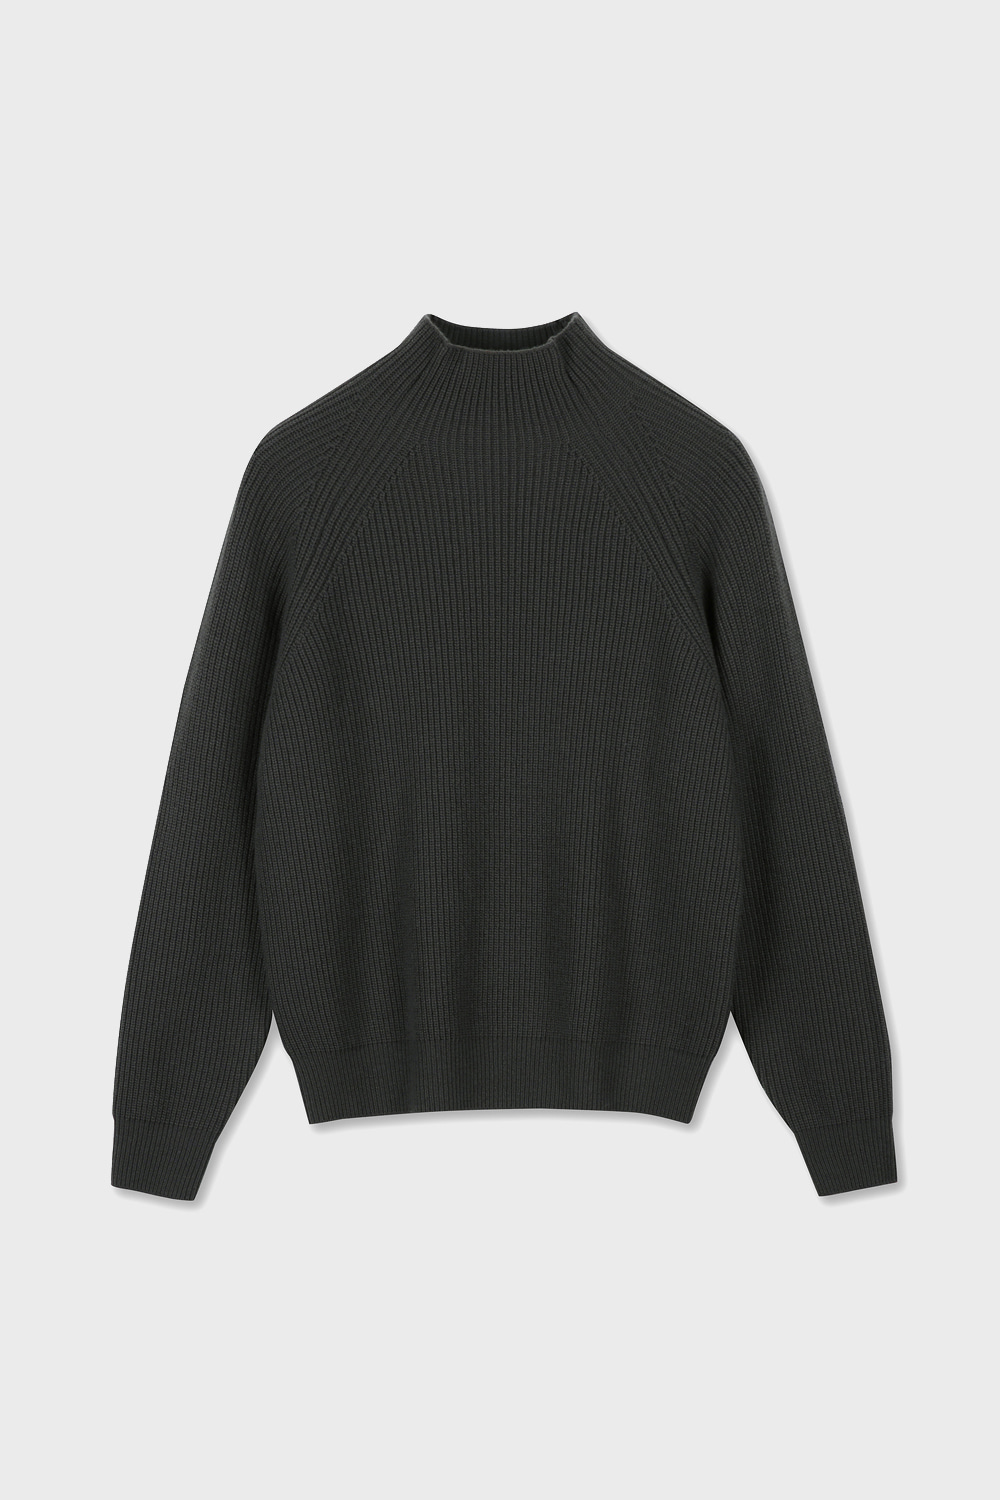 WOOL HIGH NECK KNIT (CHARCOAL)